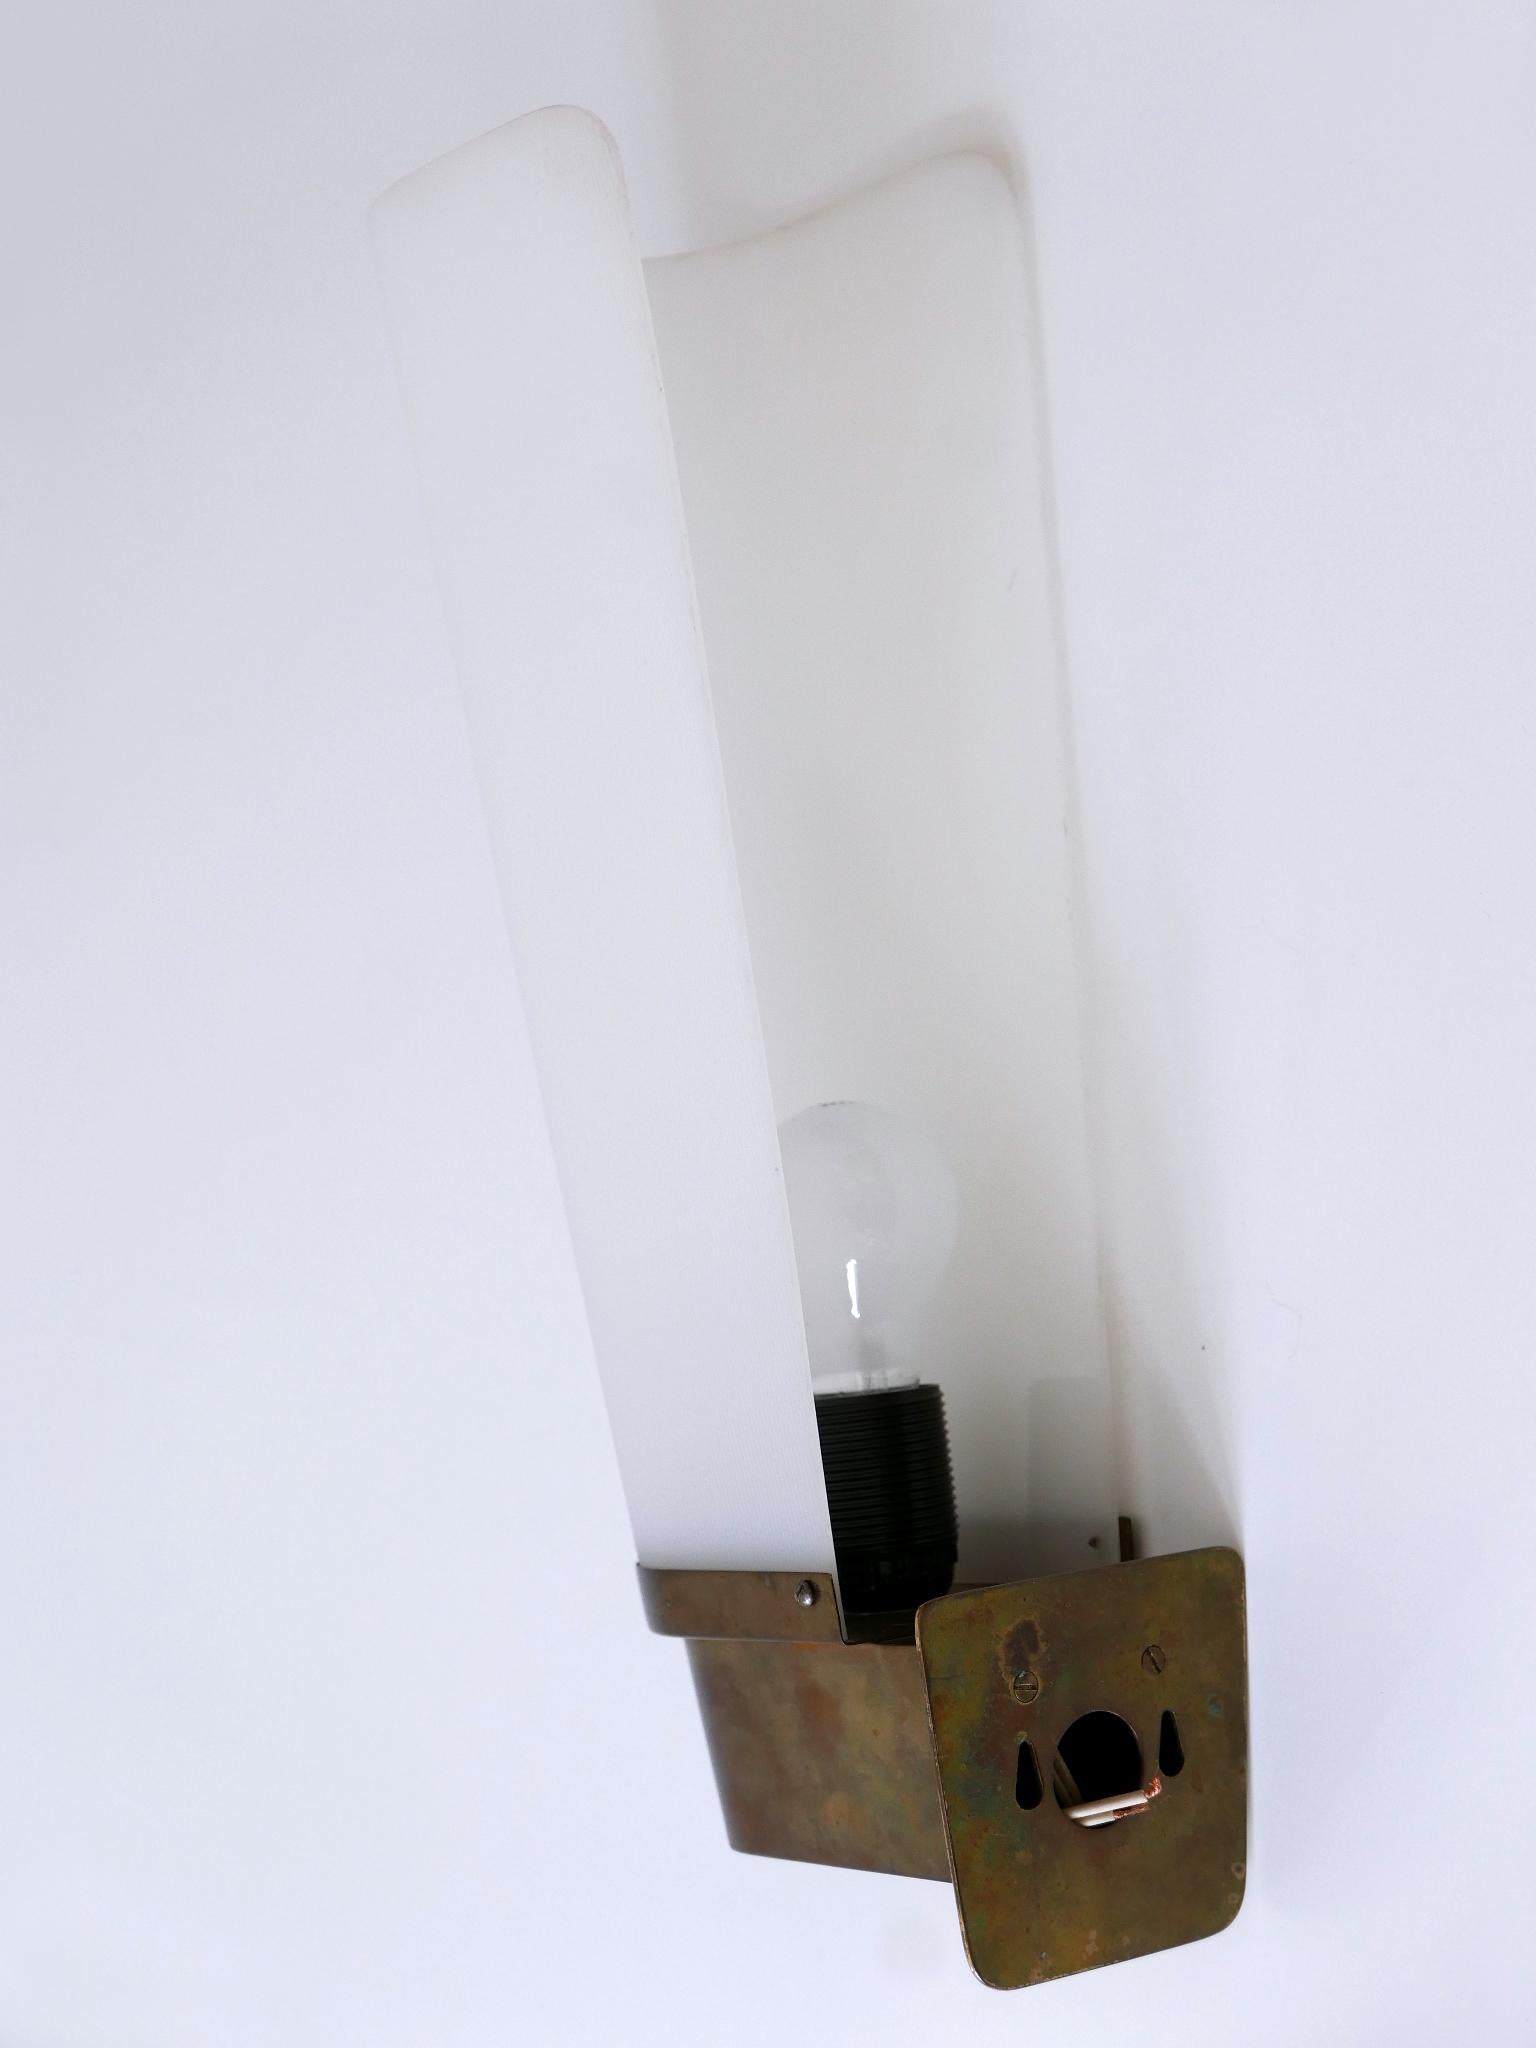 Large Mid-Century Modern Brass & Acrylic Wall Light or Sconce Germany 1950s For Sale 7